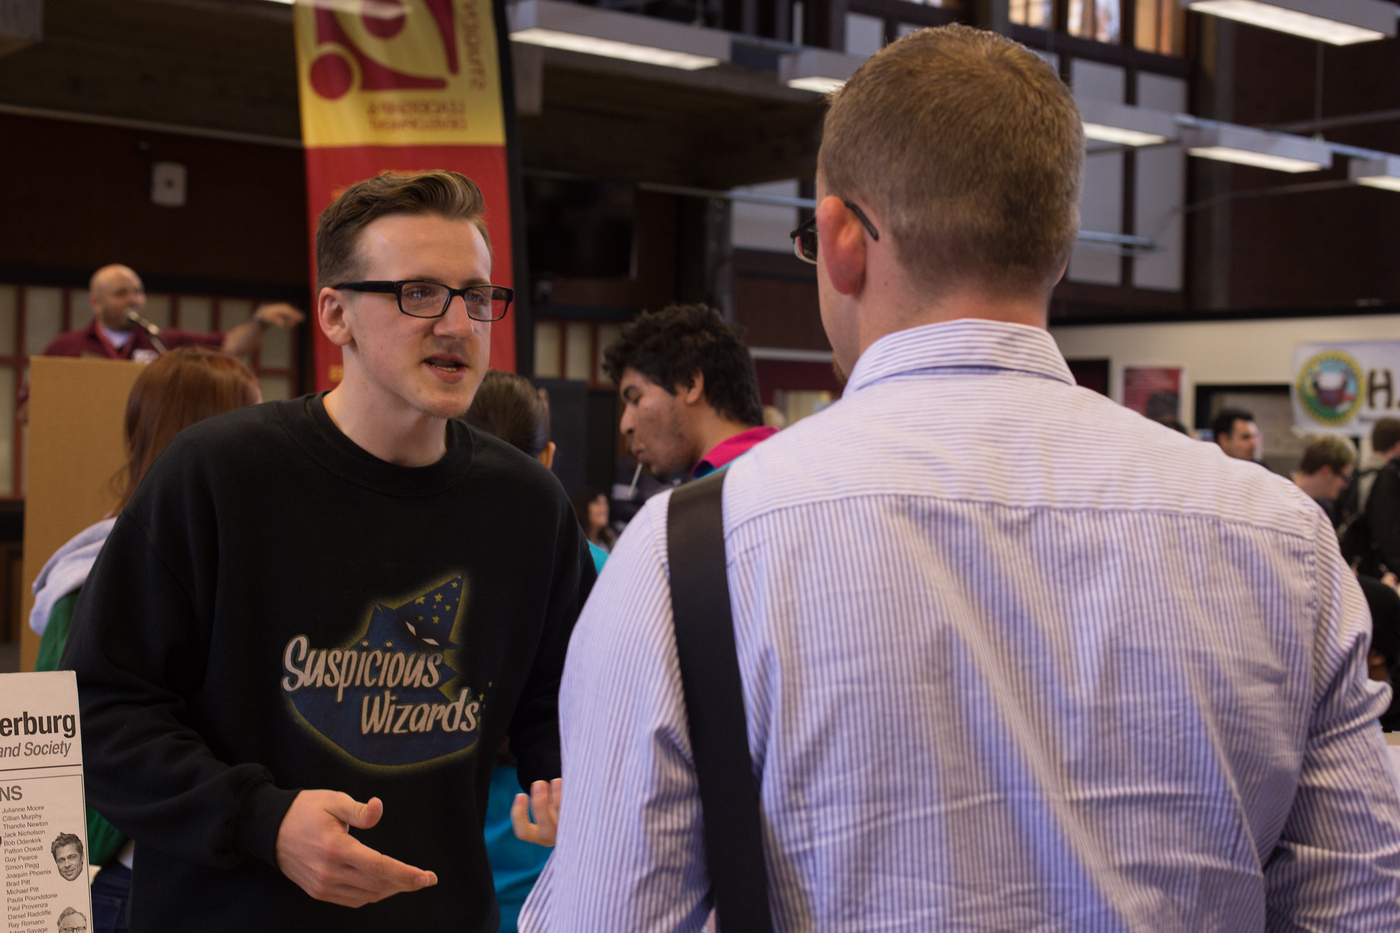 City College student Ralph Tilson, pyschology major, speaks to a student about the Secular Student Alliance on Club Day in the Student Center March 3, 2016. Hector Flores, Staff Photographer. | hectorfloresexpress@gmail.com